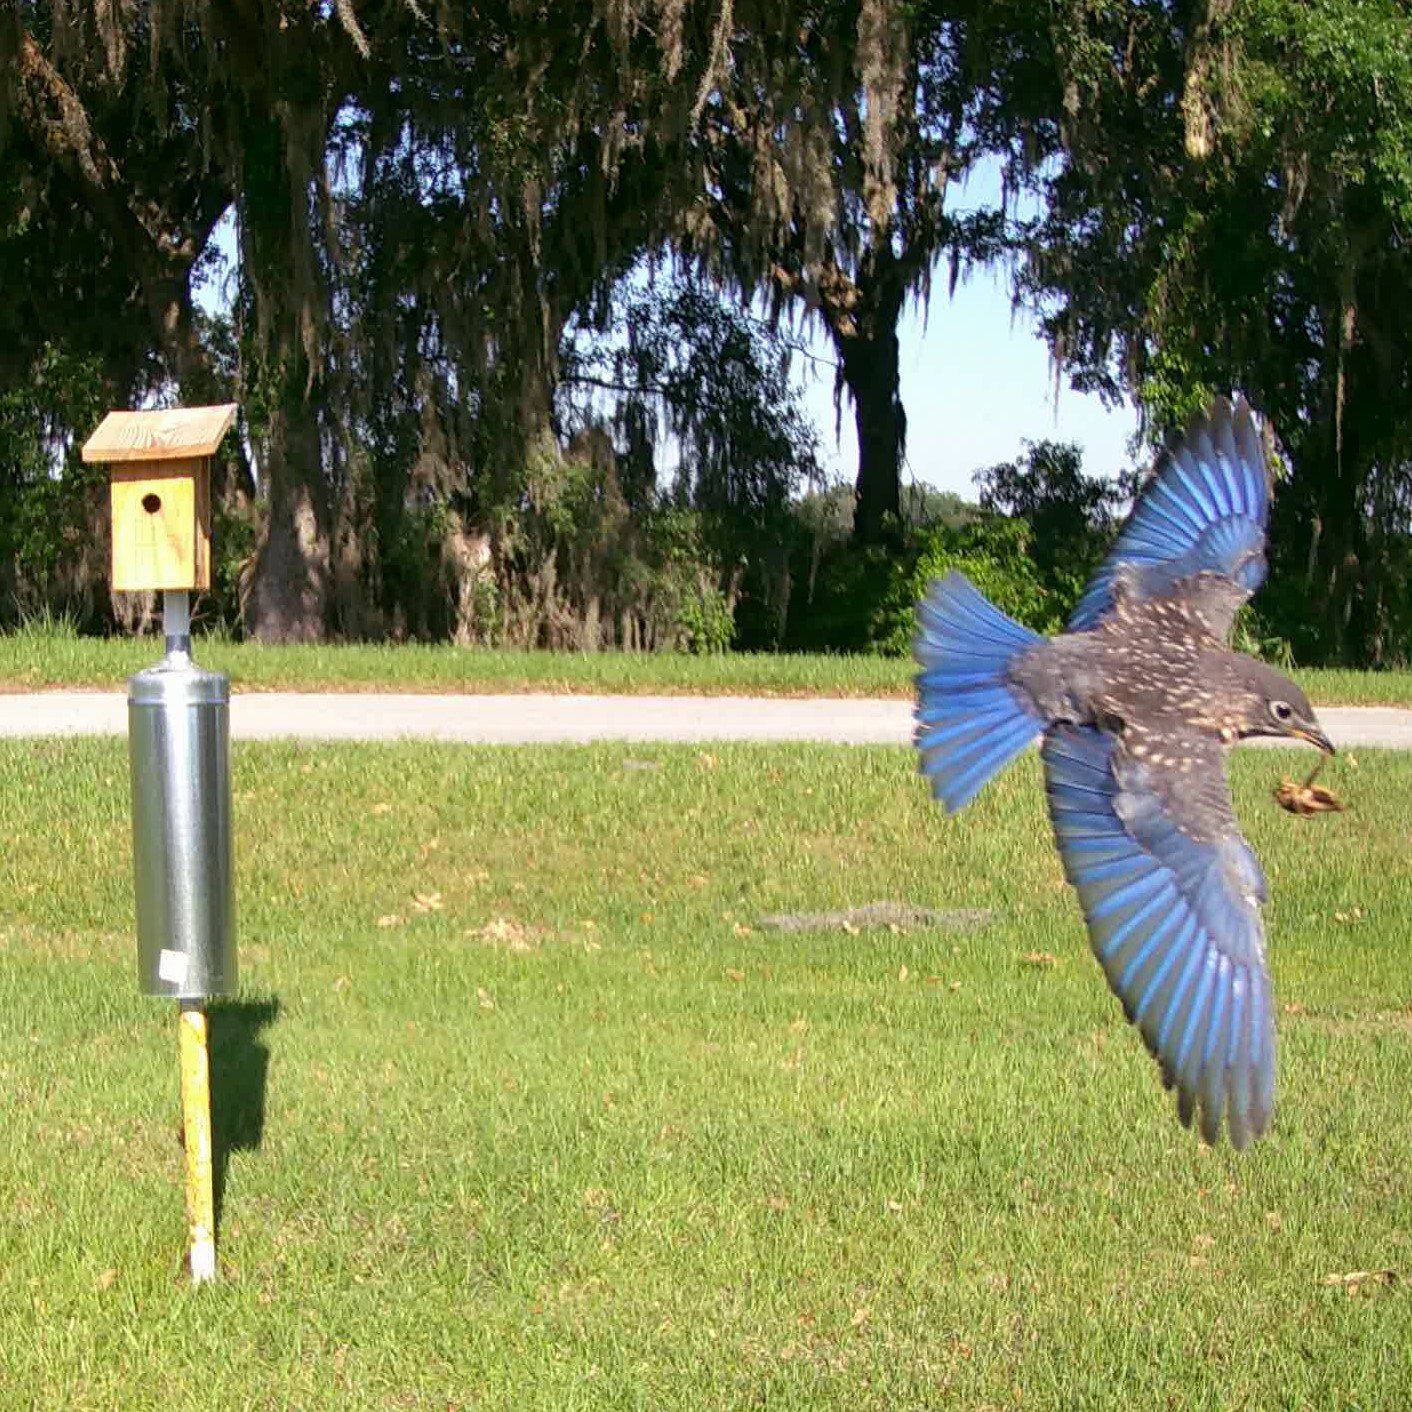 HARDEE COUNTY - An Eastern bluebird flying away from a nest box at the UF/IFAS Range Cattle Research and Education Center in Ona, Florida.